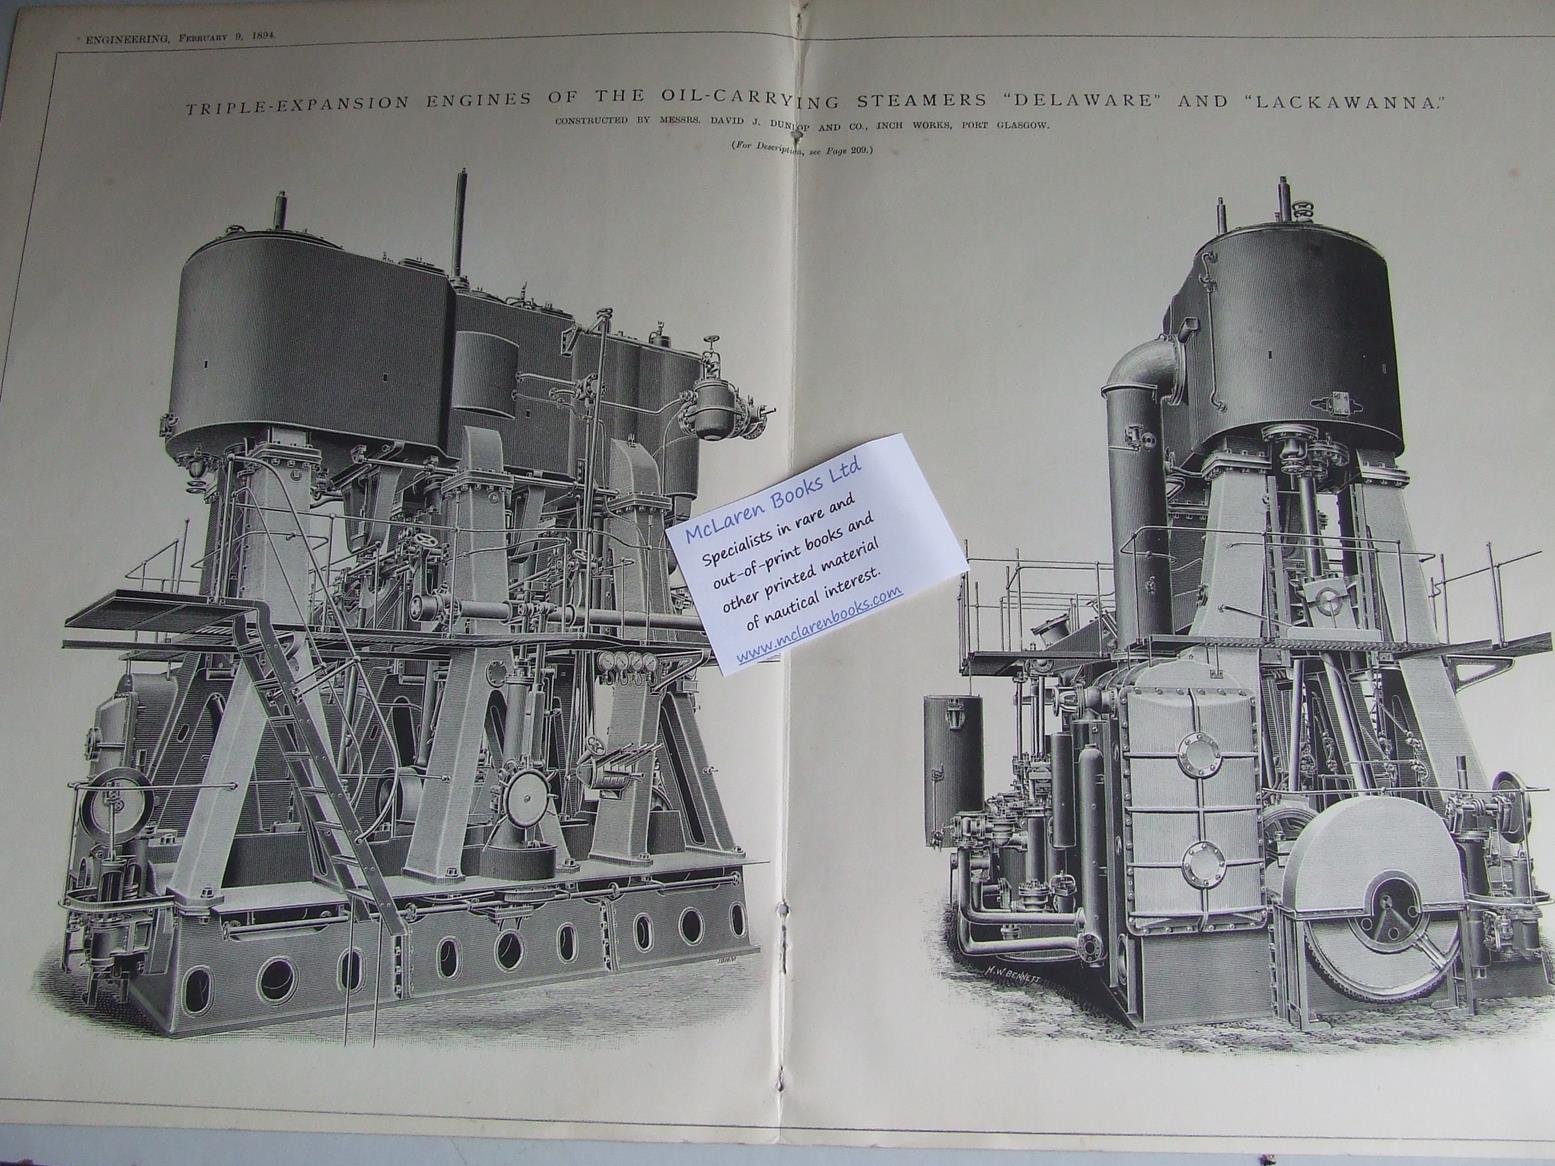 Triple-Expansion Engines of the Oil Carrying Steamers "Delaware" and "Lackawanna"